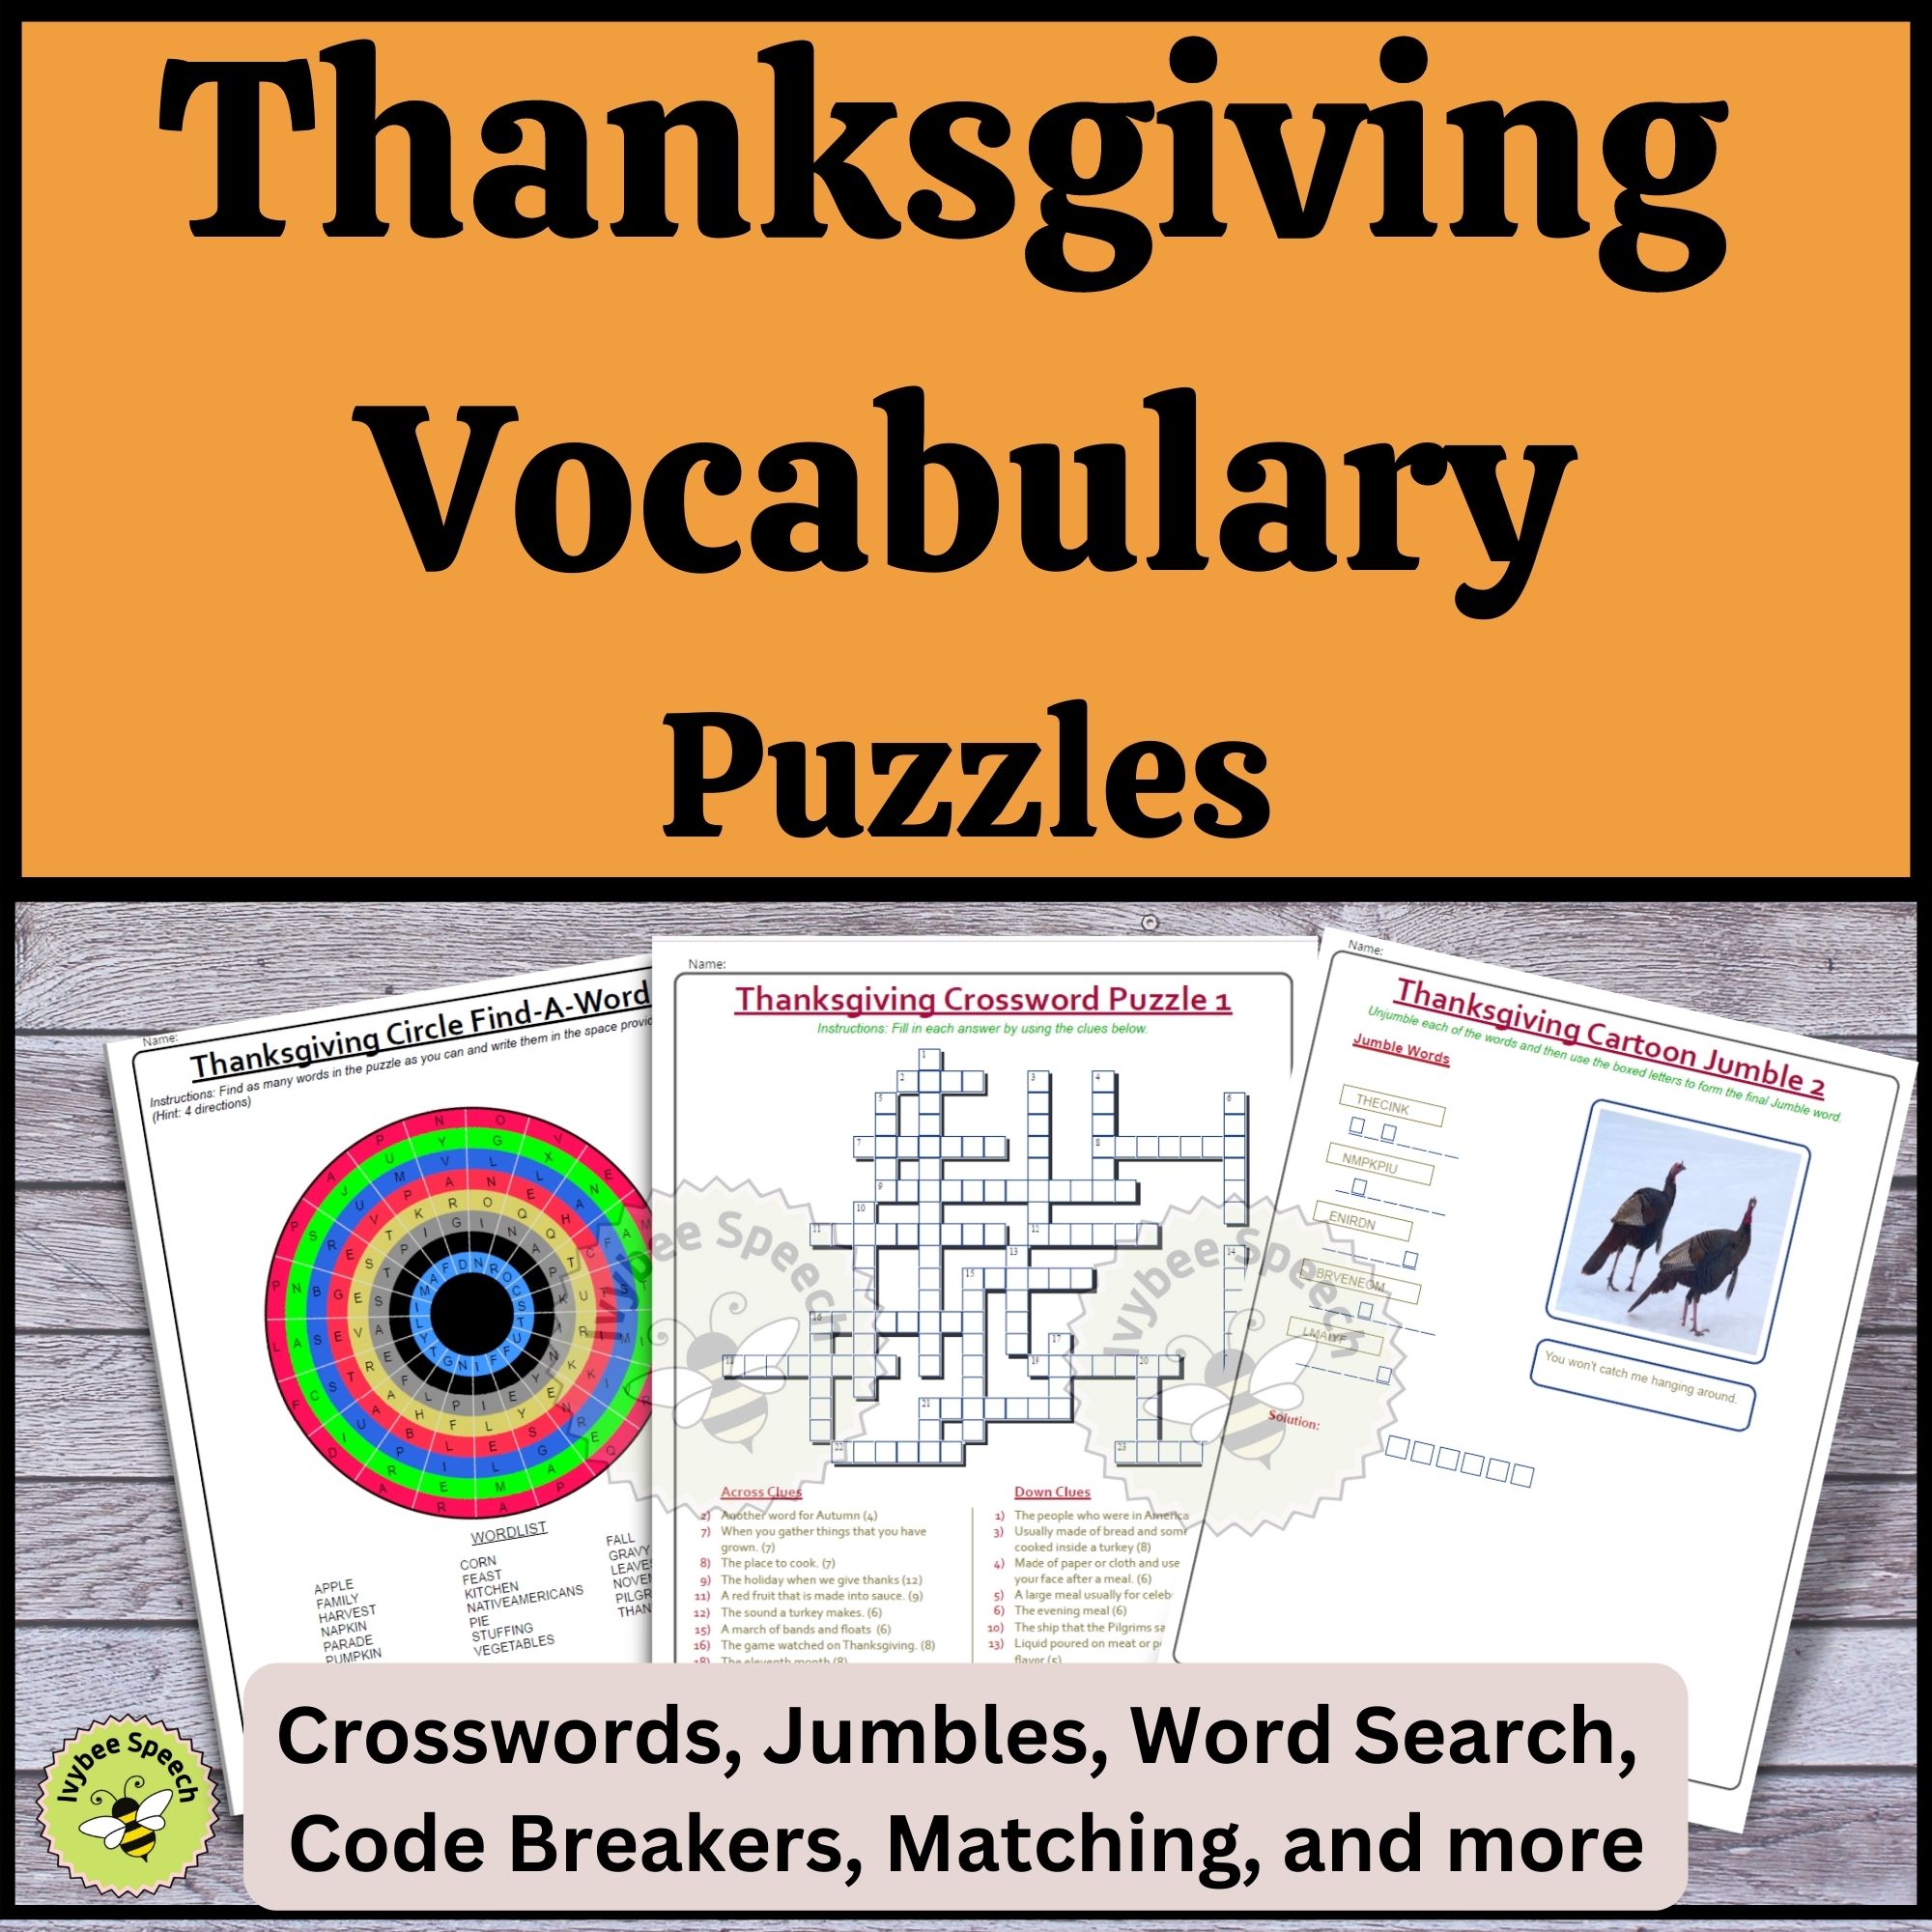 Thanksgiving Vocabulary Puzzles Crosswords Word Searches Code Breakers Jumbles